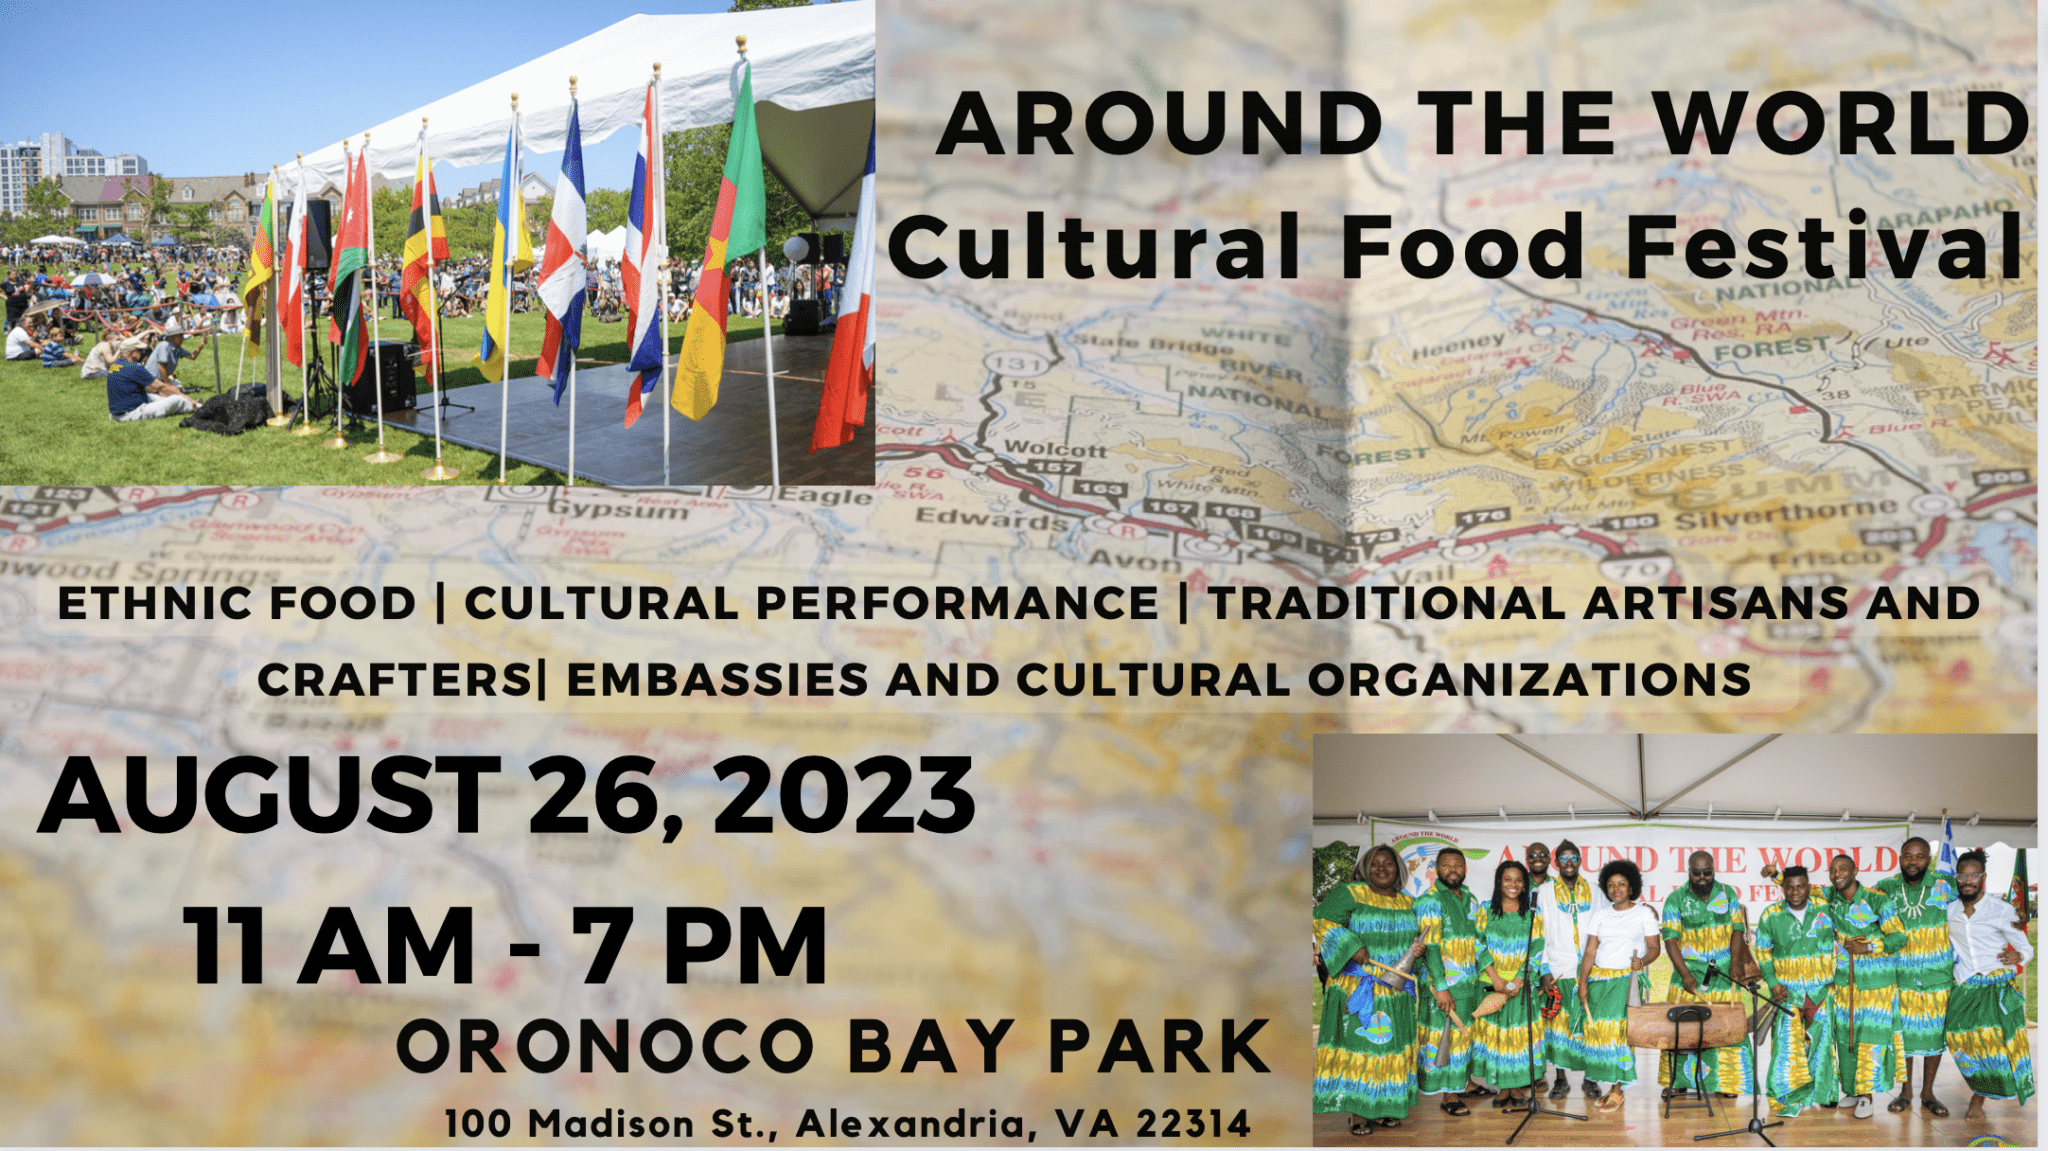 2023 Around the World Cultural Food Festival